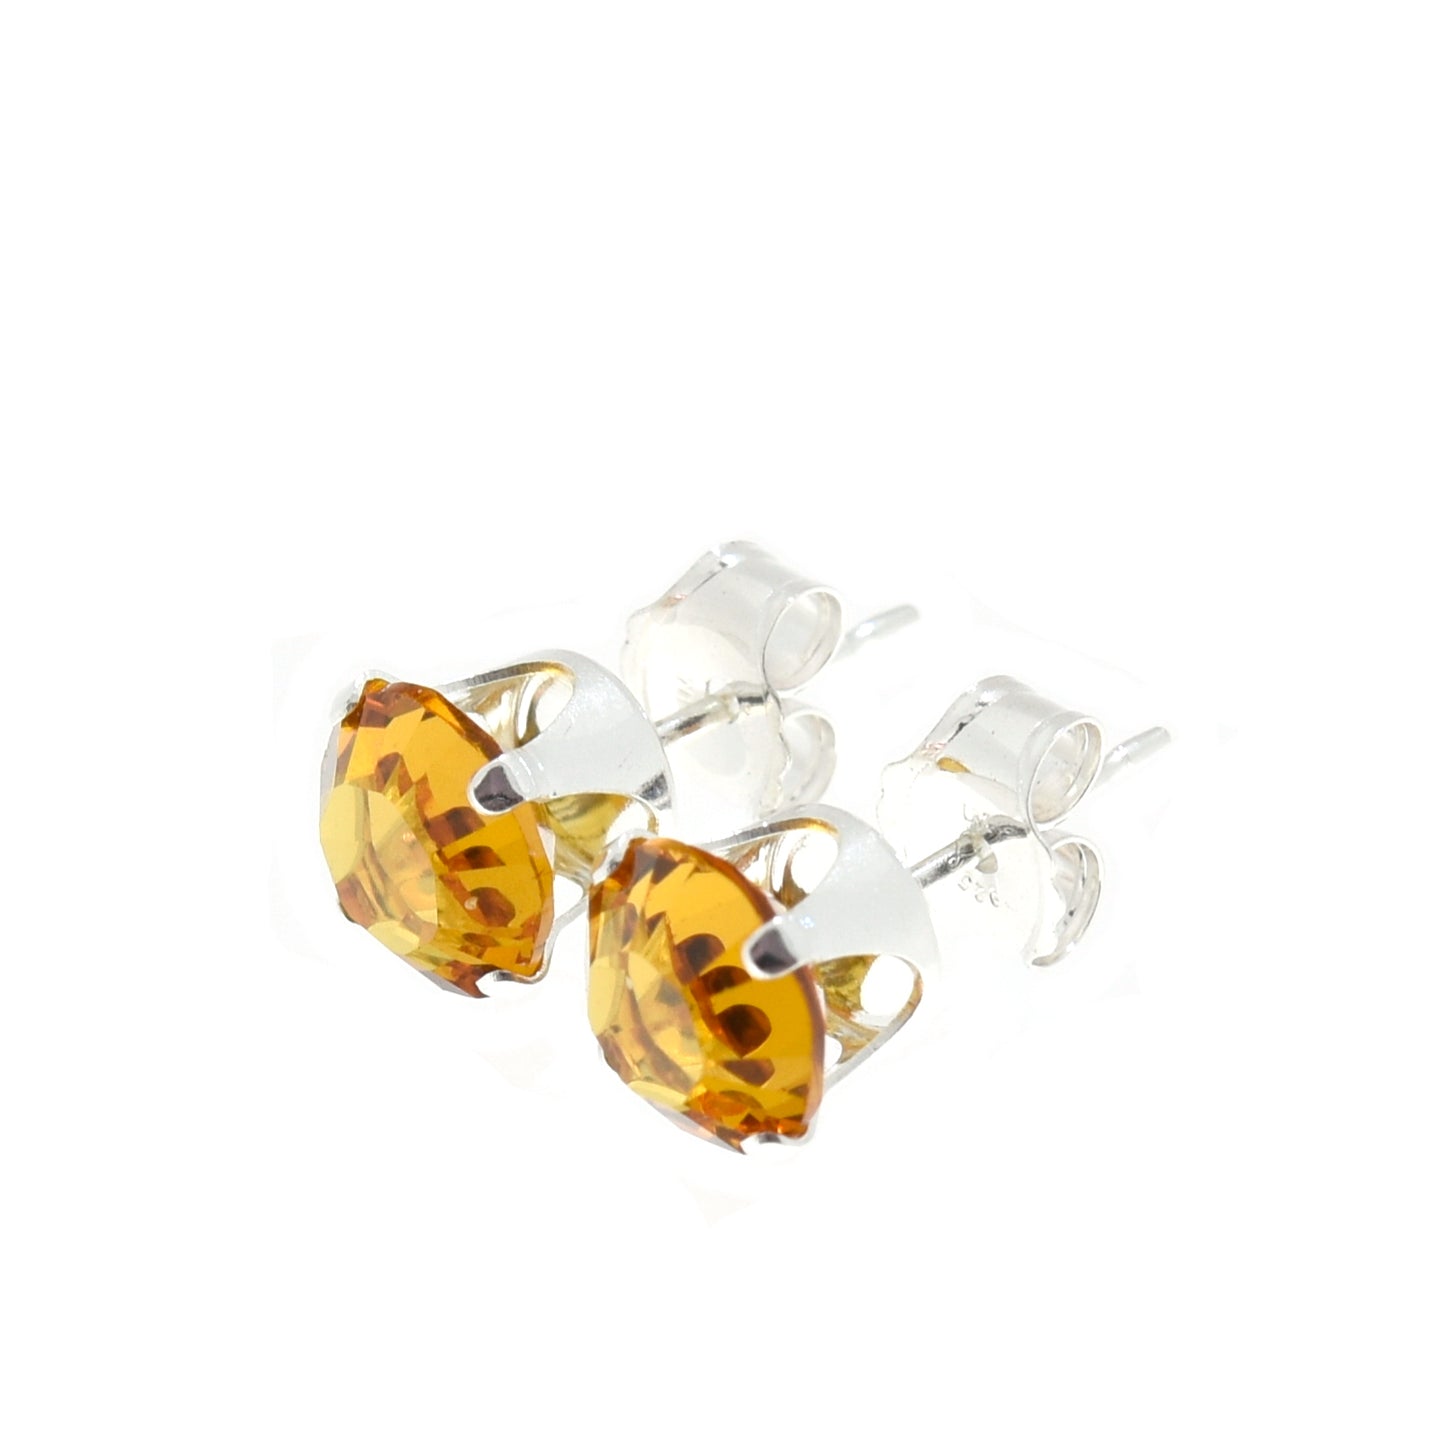 pewterhooter® Women's Classic Collection 925 Sterling silver earrings with sparkling Light Topaz channel crystals, packaged in a gift box for any occasion.